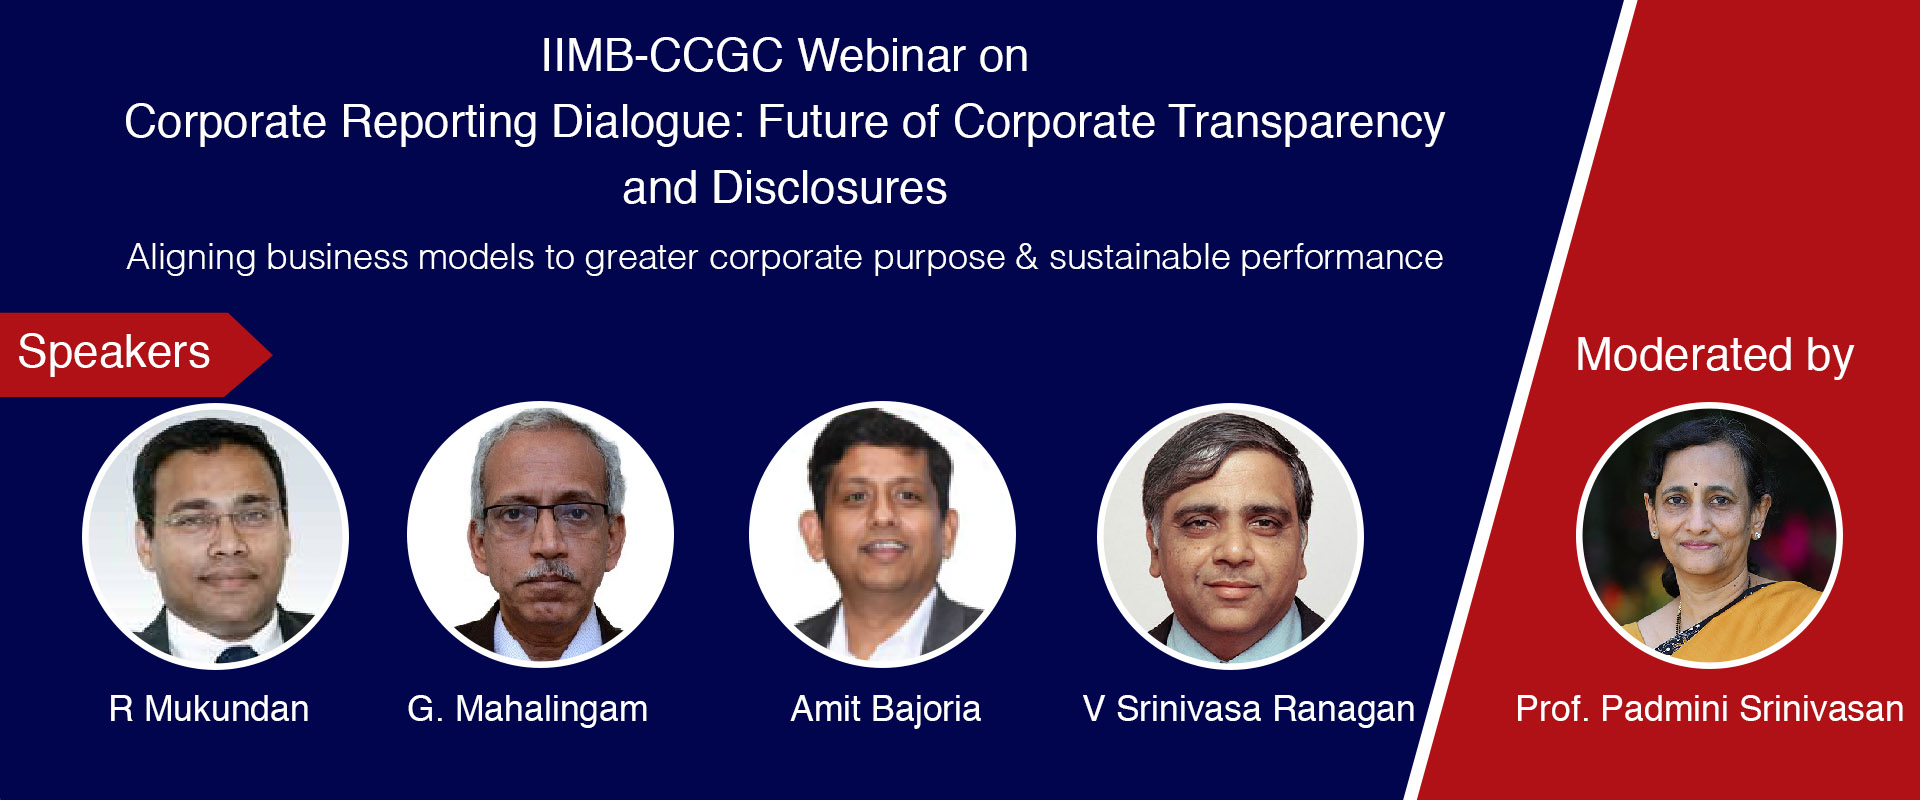 CCGC hosts webinar on Corporate Reporting Dialogue : Future of Corporate Transparency and Disclosures on 26th Aug 2021